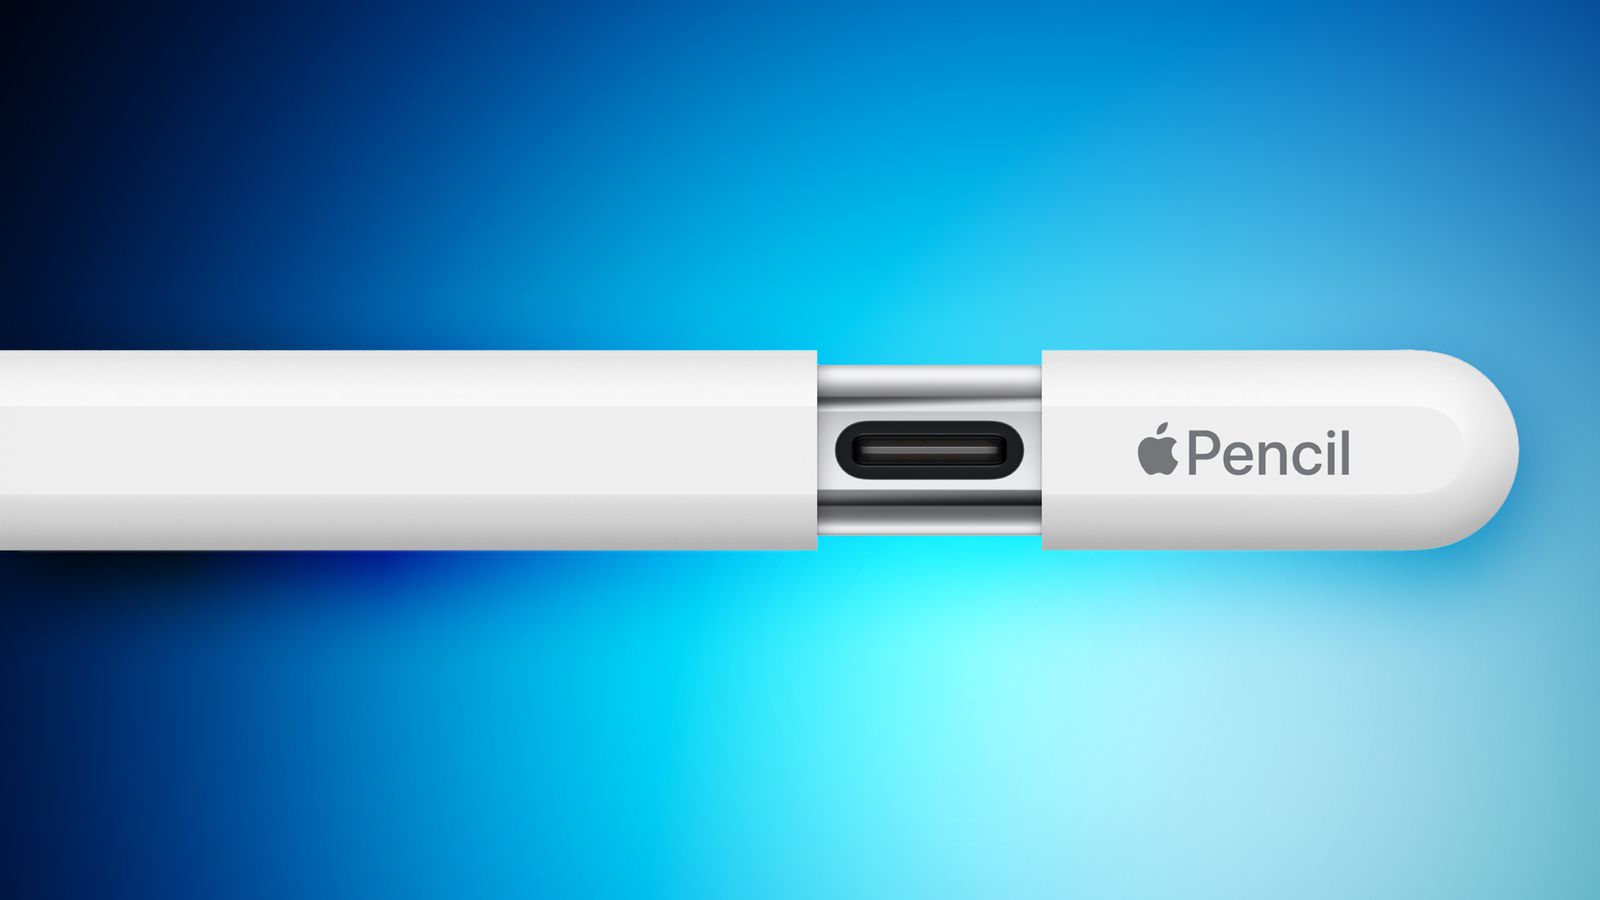 New Apple Pencil Announced With Hidden USB-C Port and More for $79 -  MacRumors